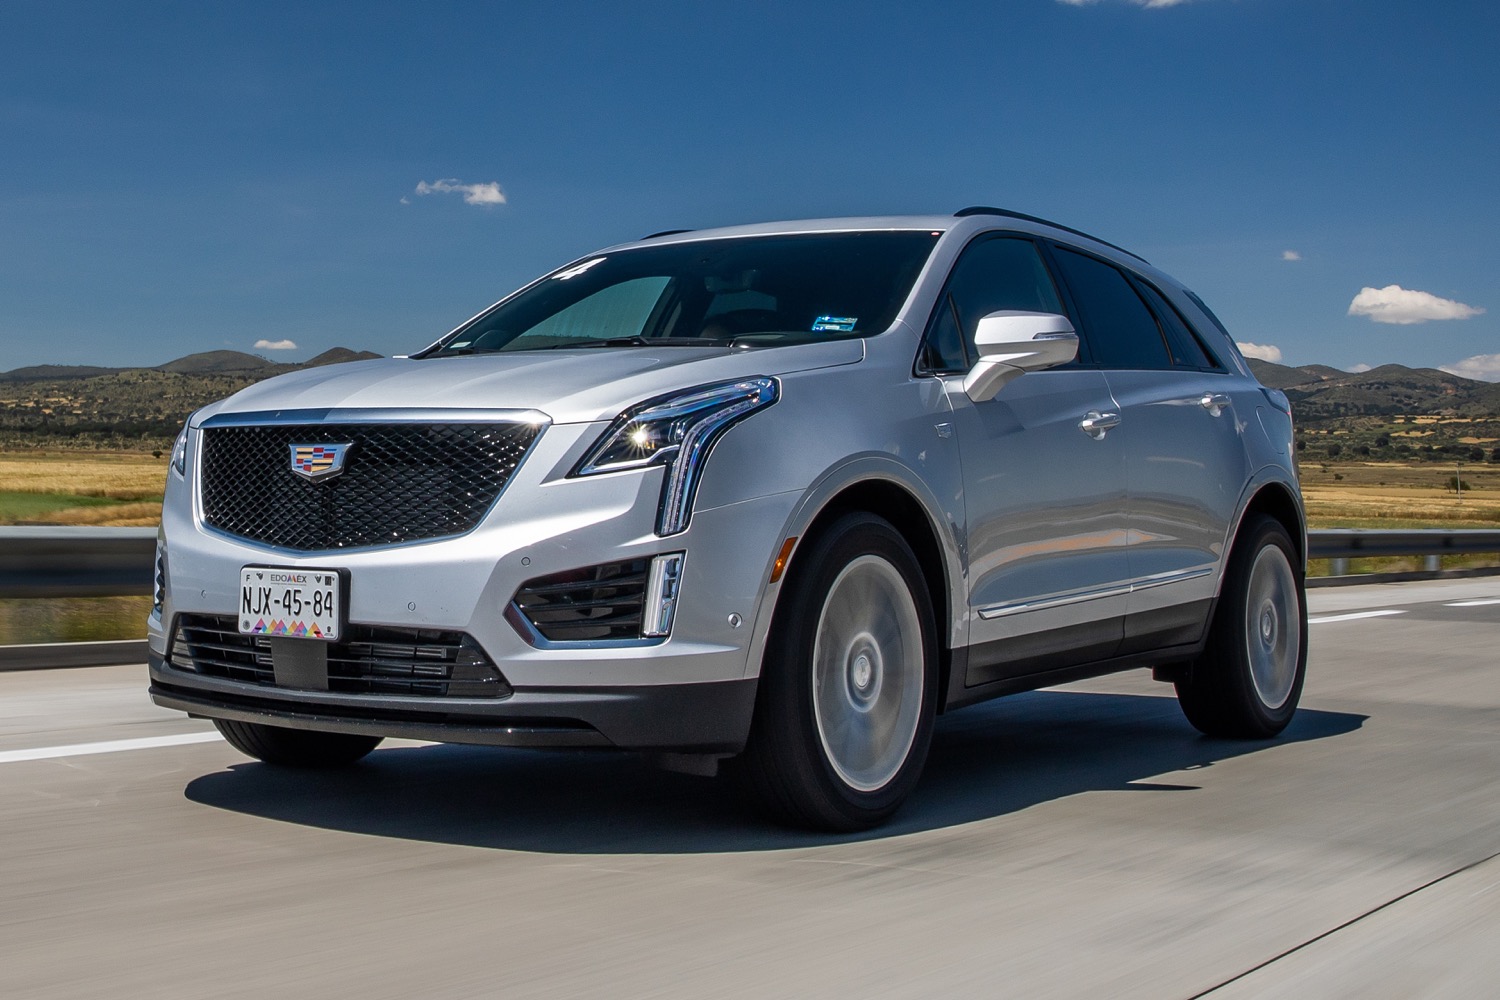 2020 Cadillac XT5 Refresh To Add Turbo-Charged 2.0L Engine